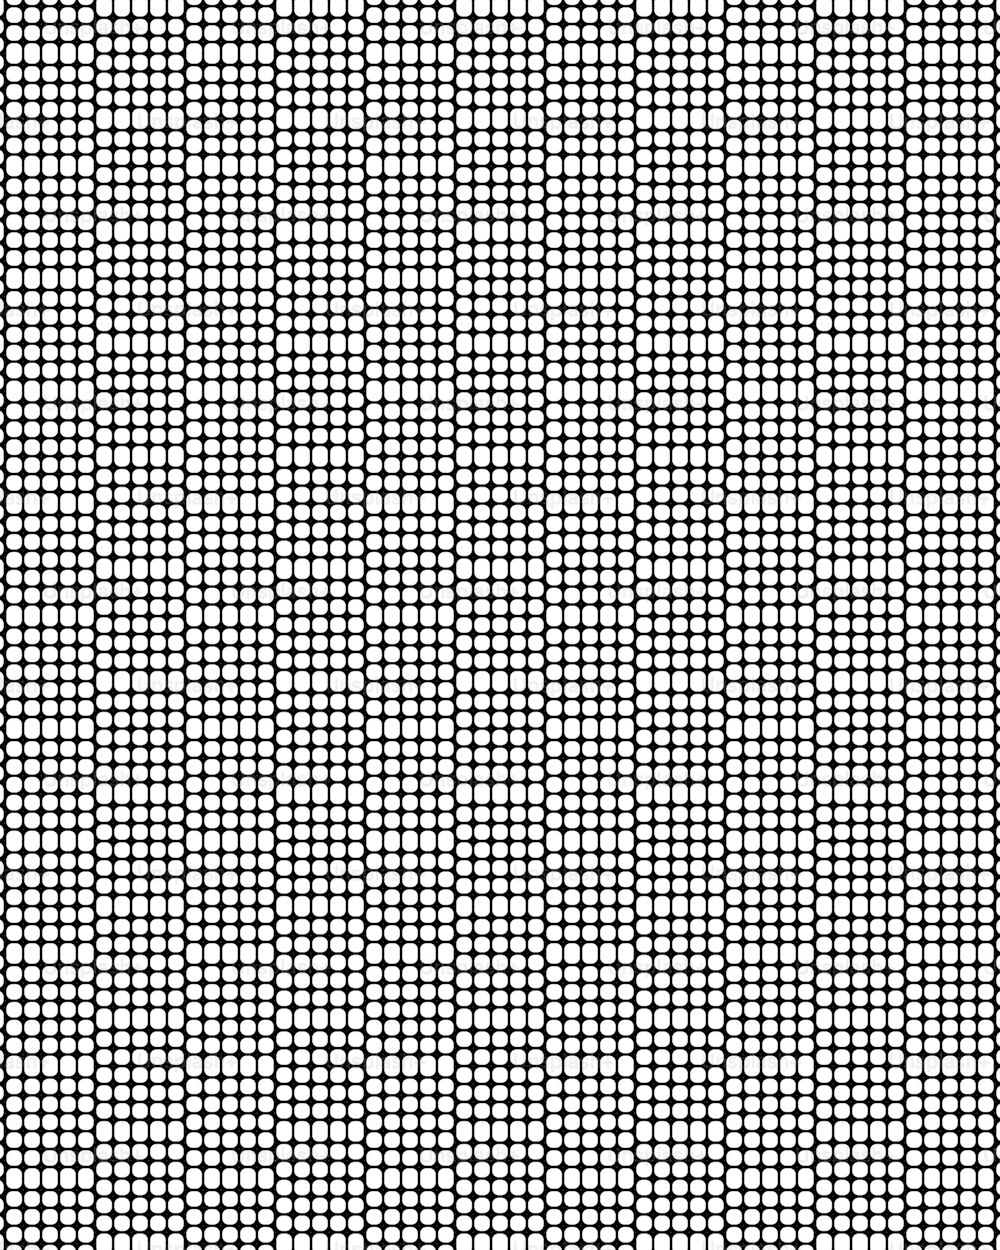 a black and white pattern of small squares